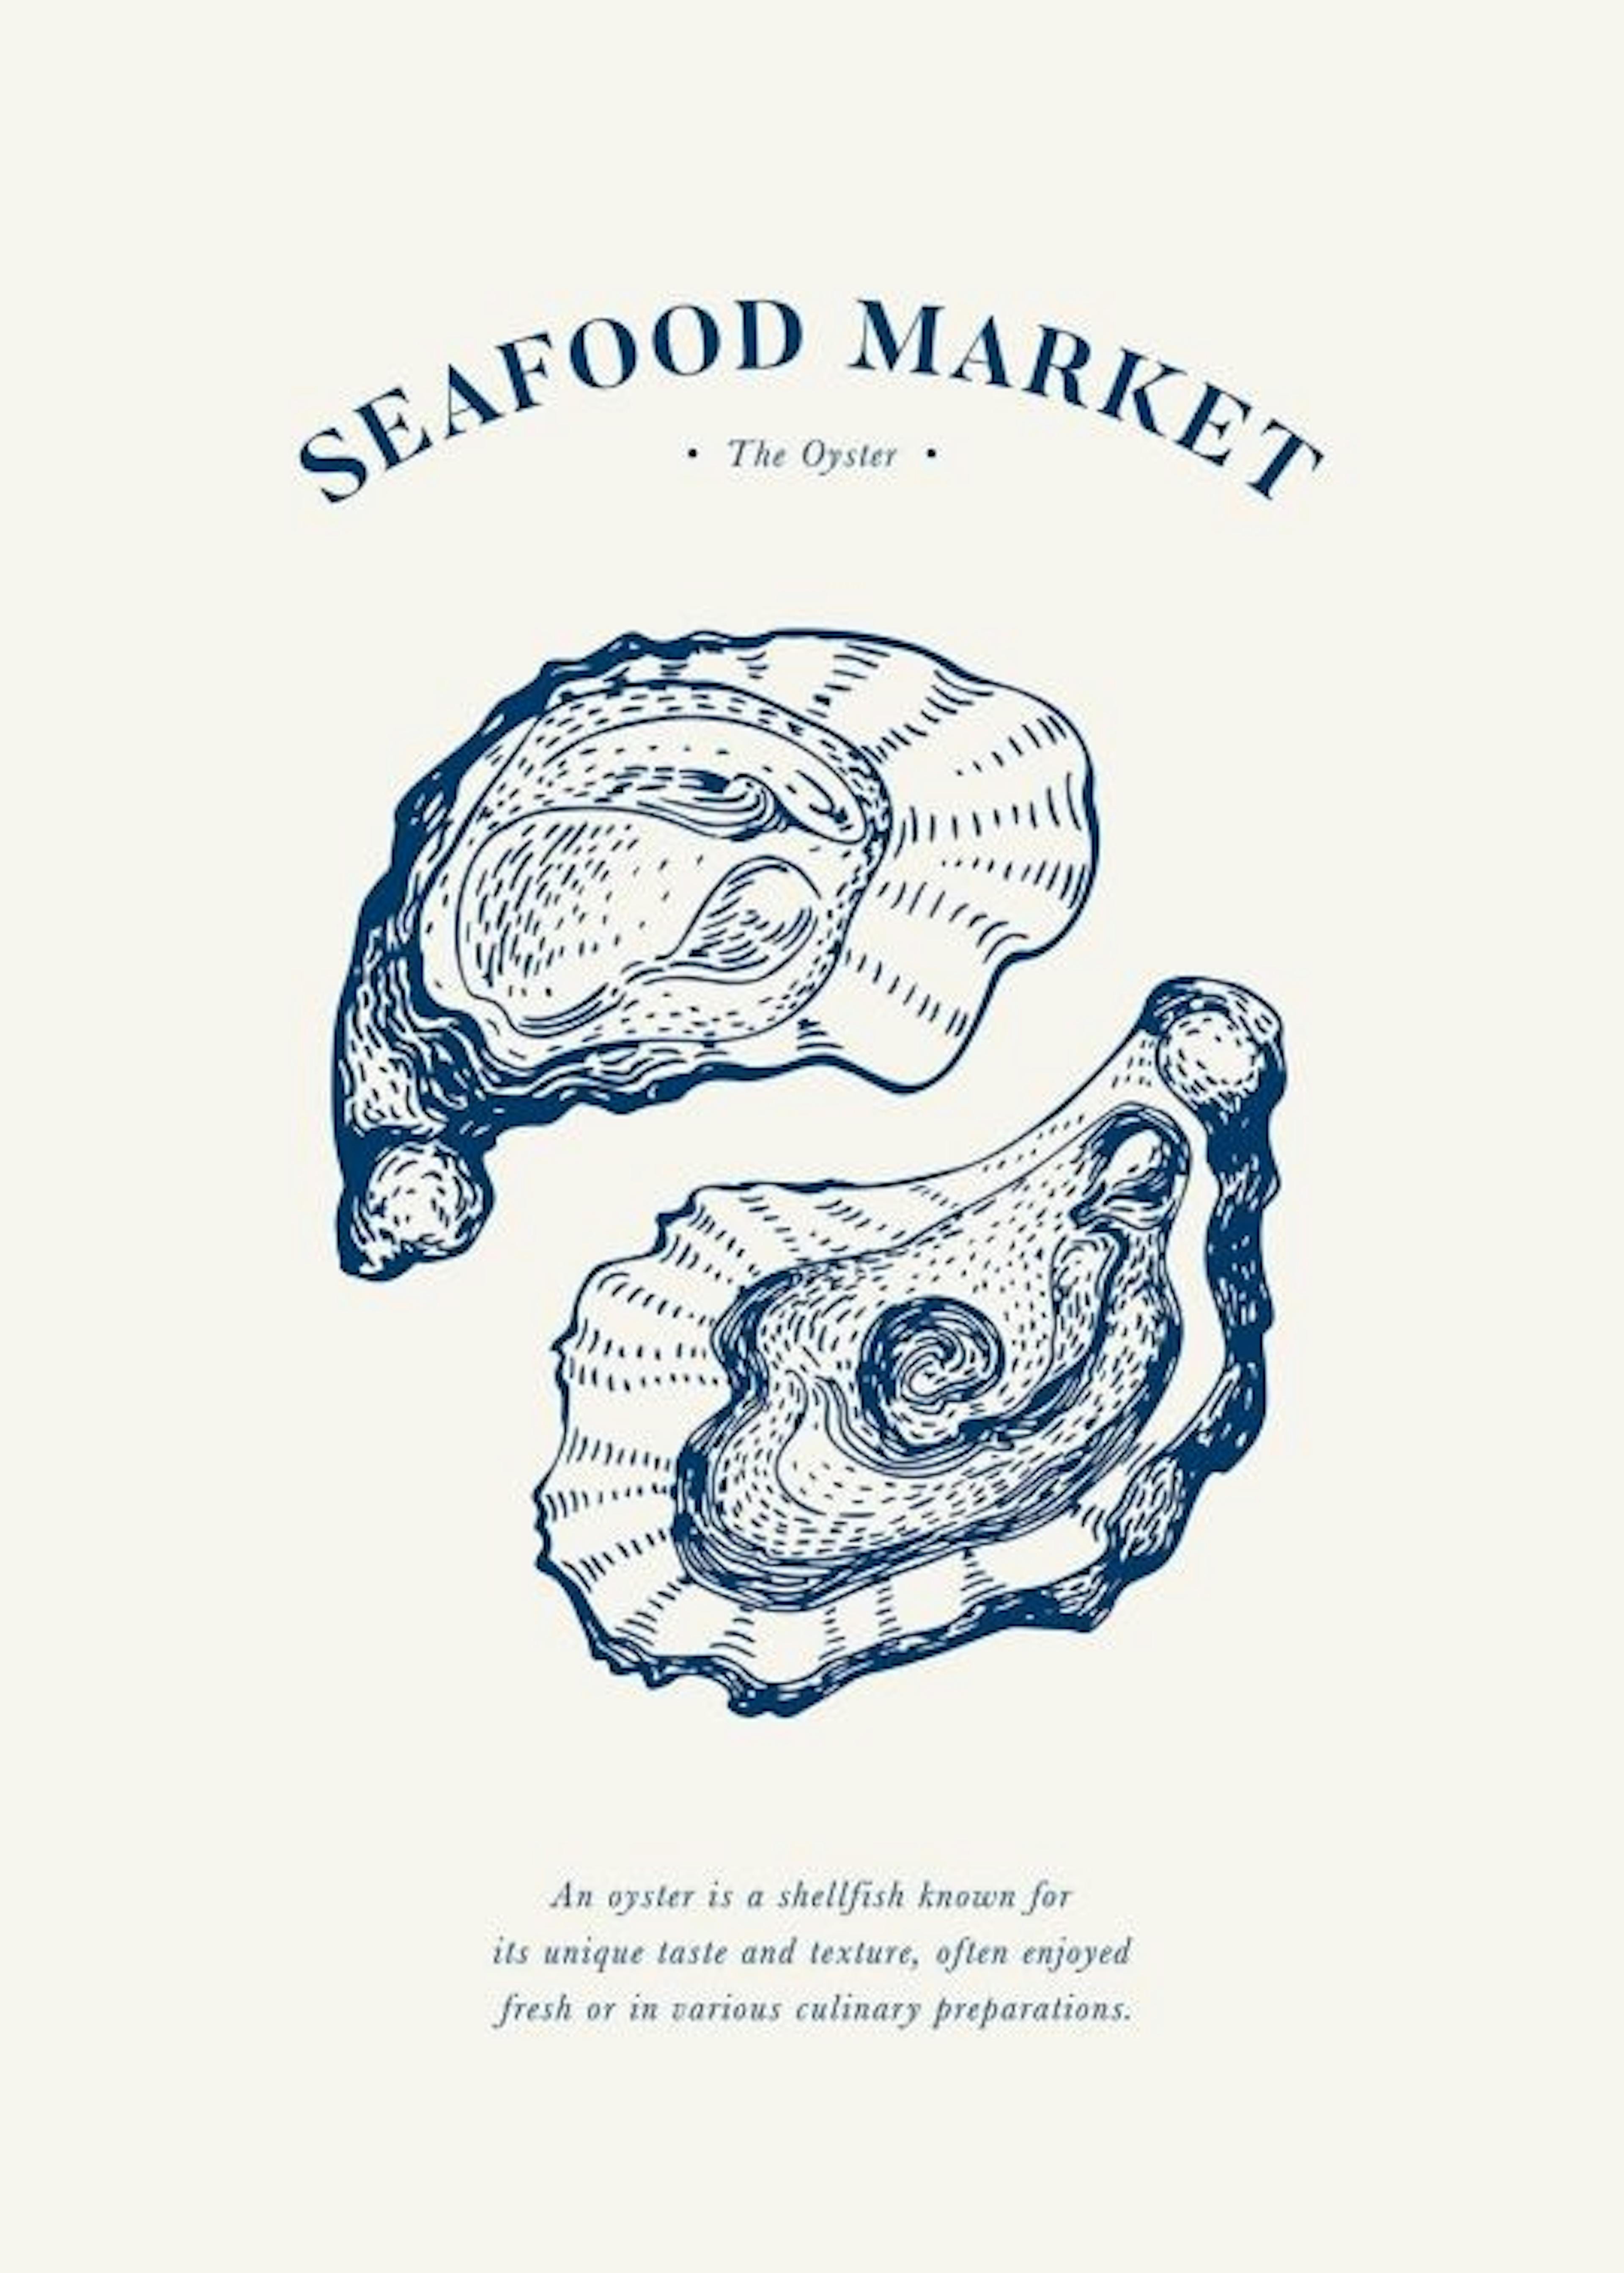 Seafood Market - The Oyster Print 0